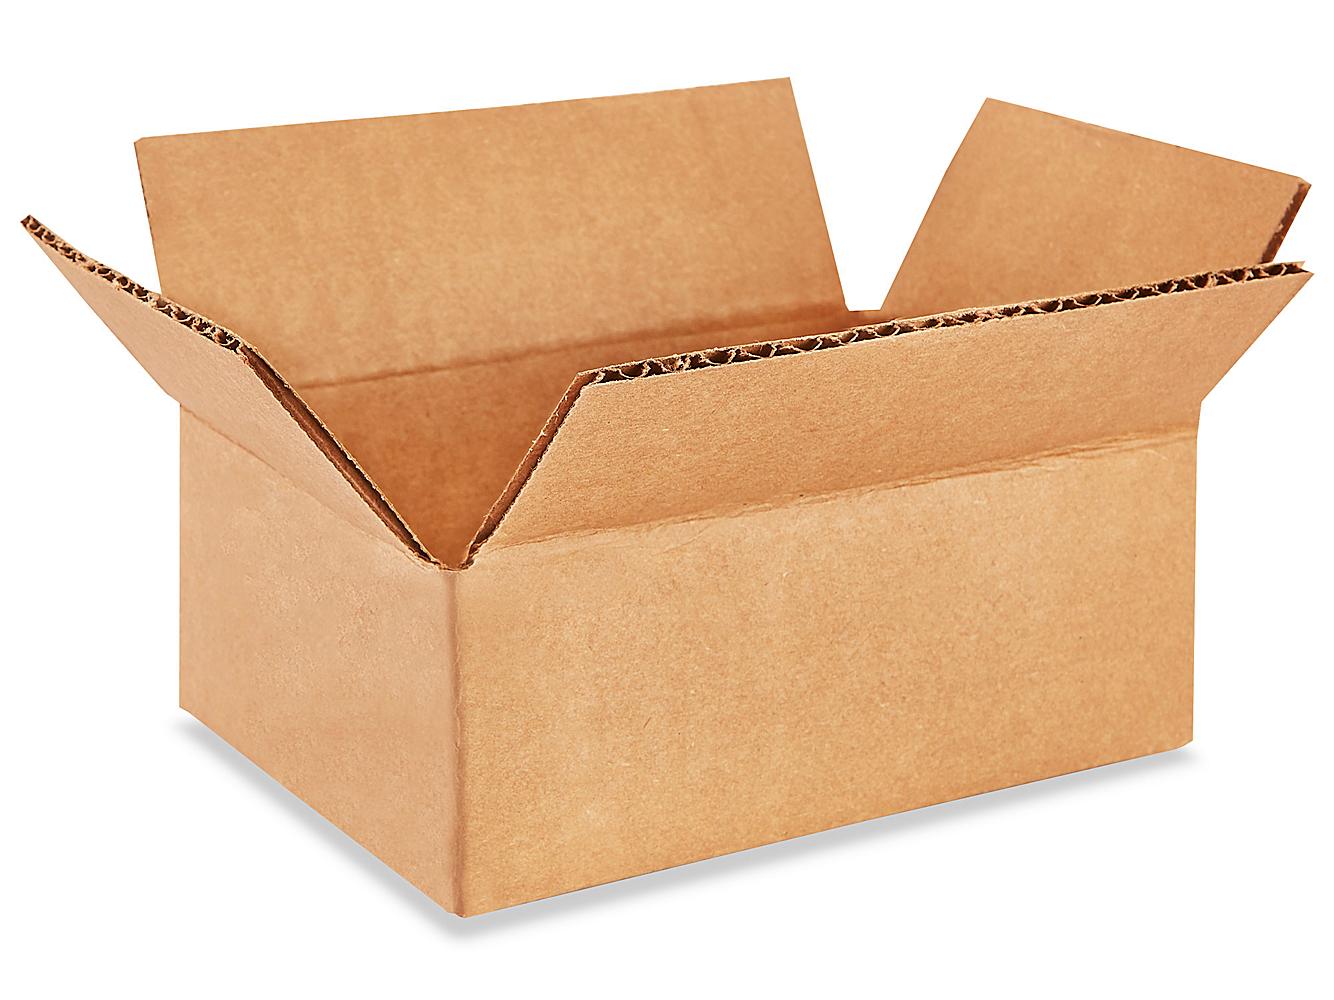 Knowing These 10 Secrets Will Make Your Heavy Duty Cardboard Boxes Look Amazing